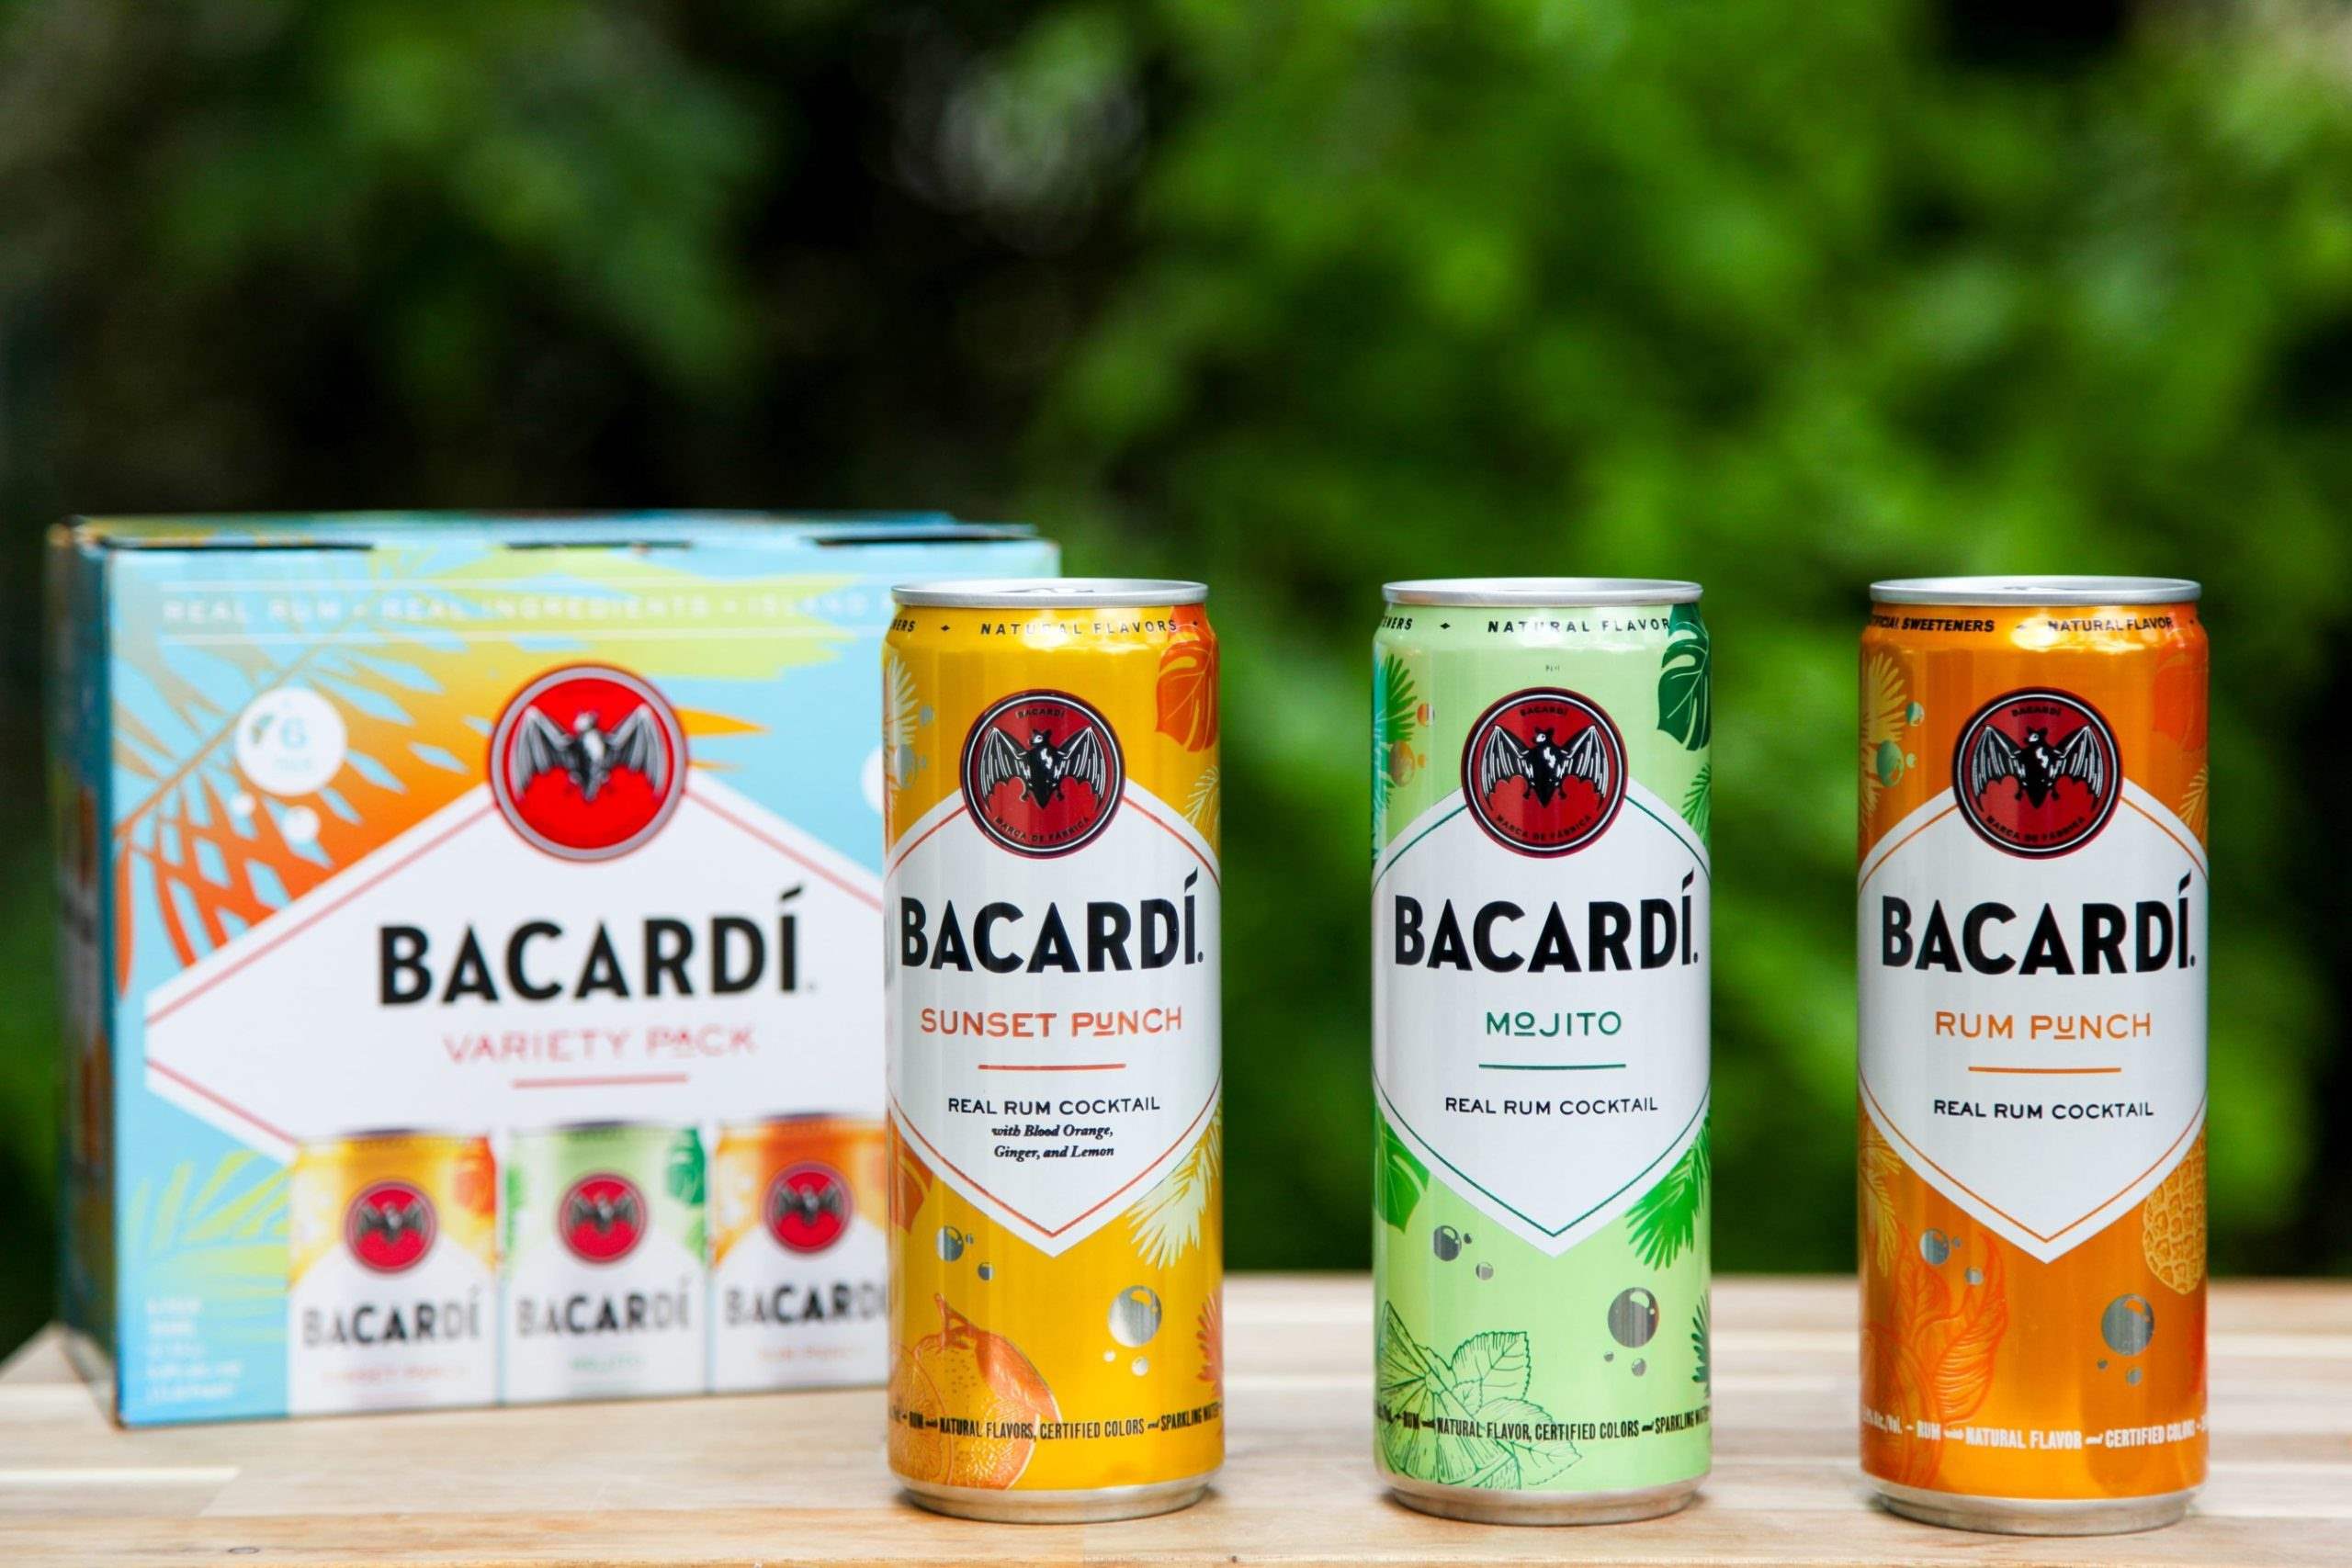 18 Bacardi Variety Pack Nutrition Facts - Facts.net